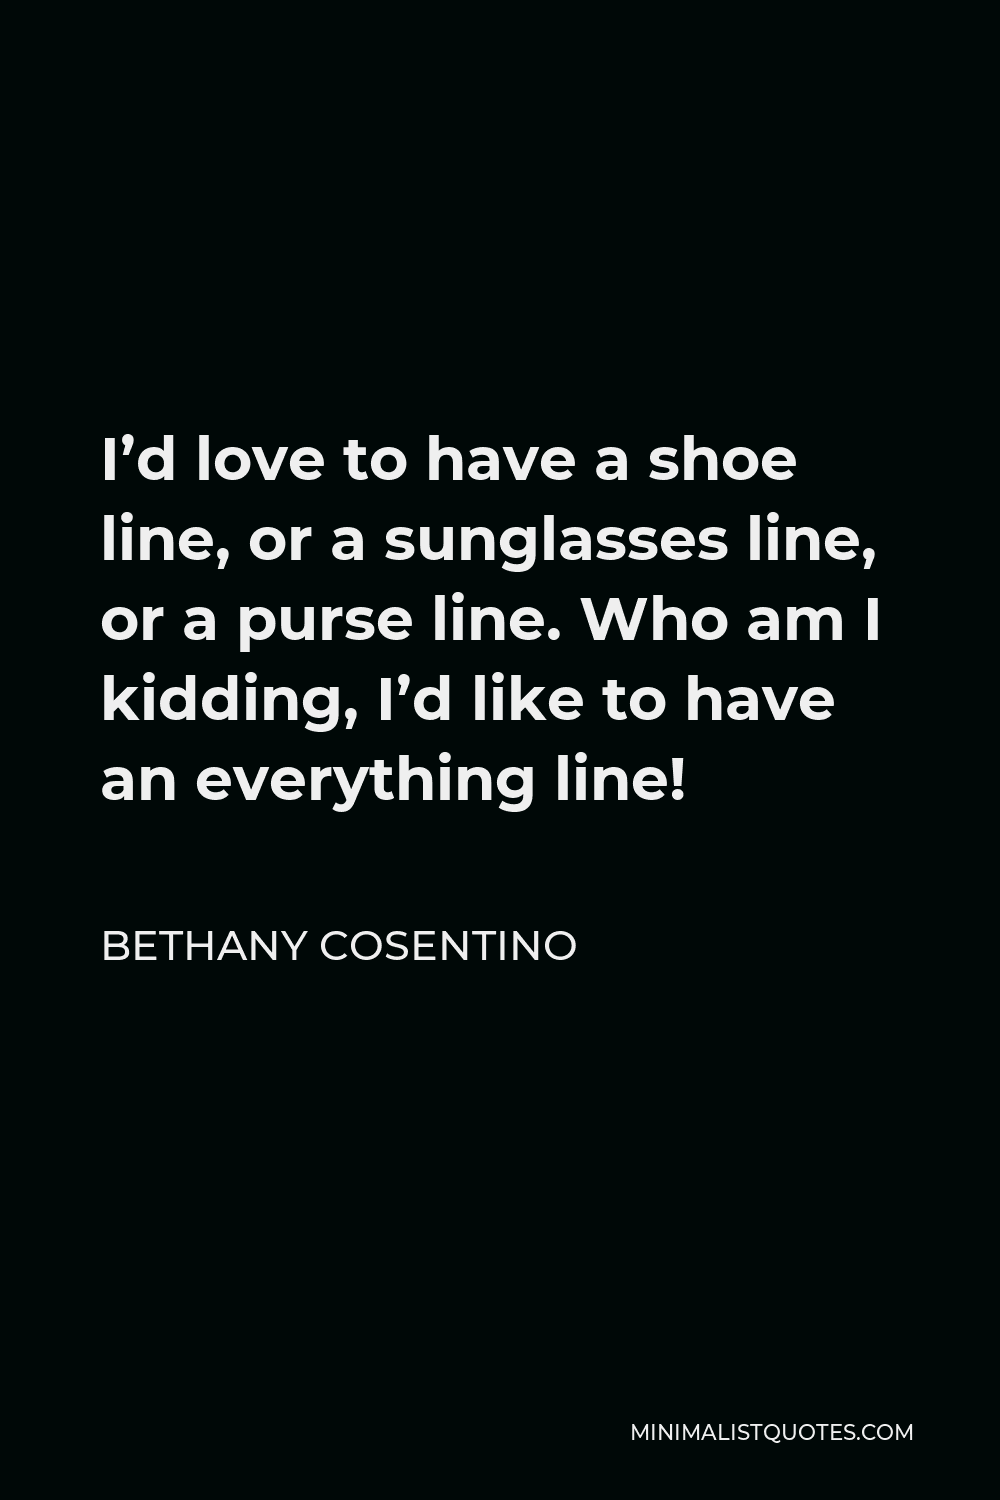 Bethany Cosentino Quote - I’d love to have a shoe line, or a sunglasses line, or a purse line. Who am I kidding, I’d like to have an everything line!